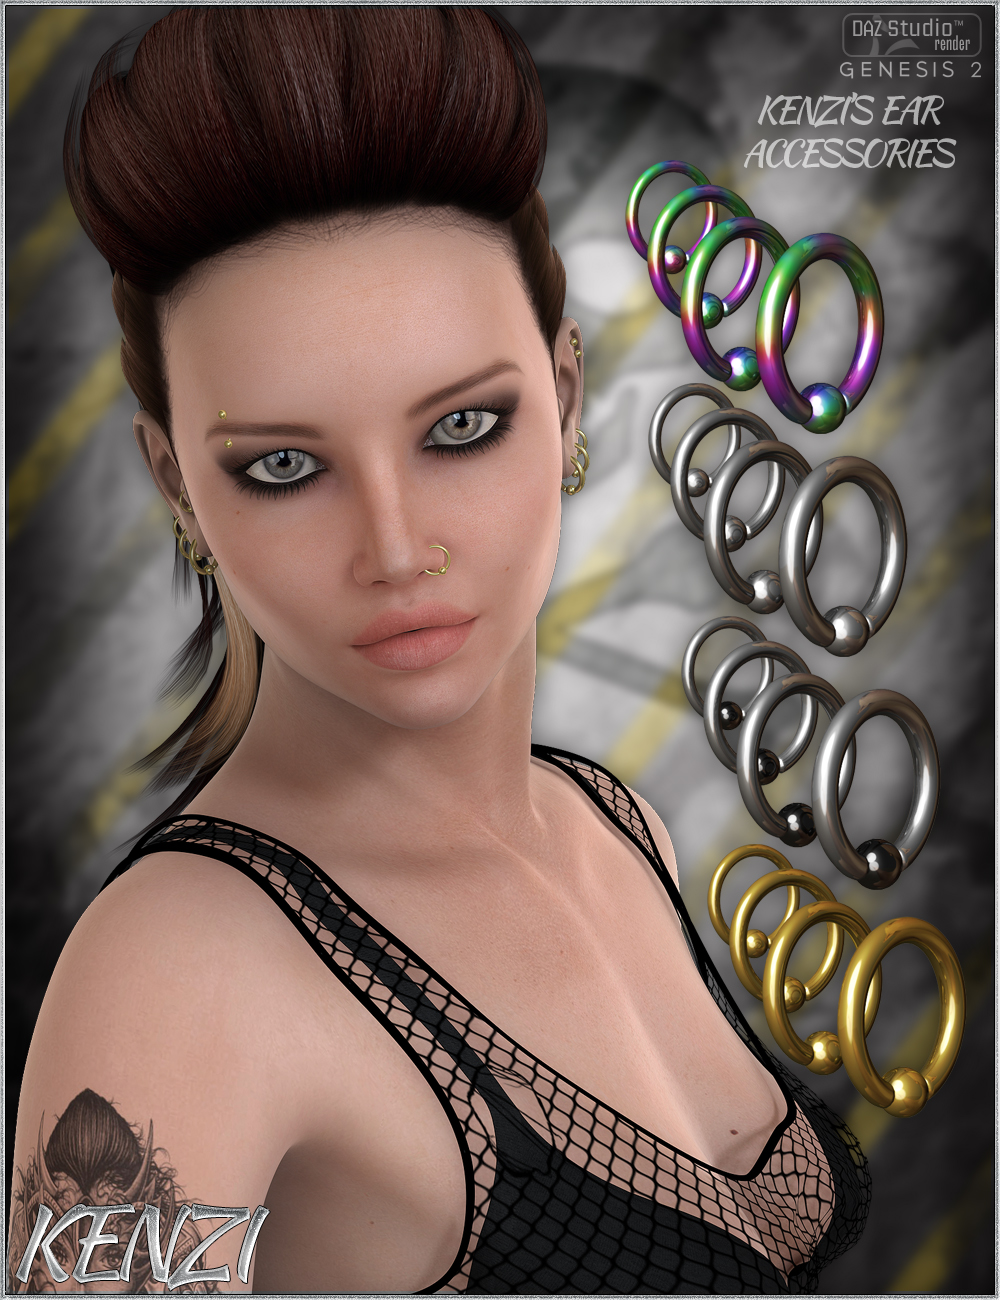 FW Kenzi - Character and Accessories by: Fred Winkler ArtFisty & DarcSabby, 3D Models by Daz 3D